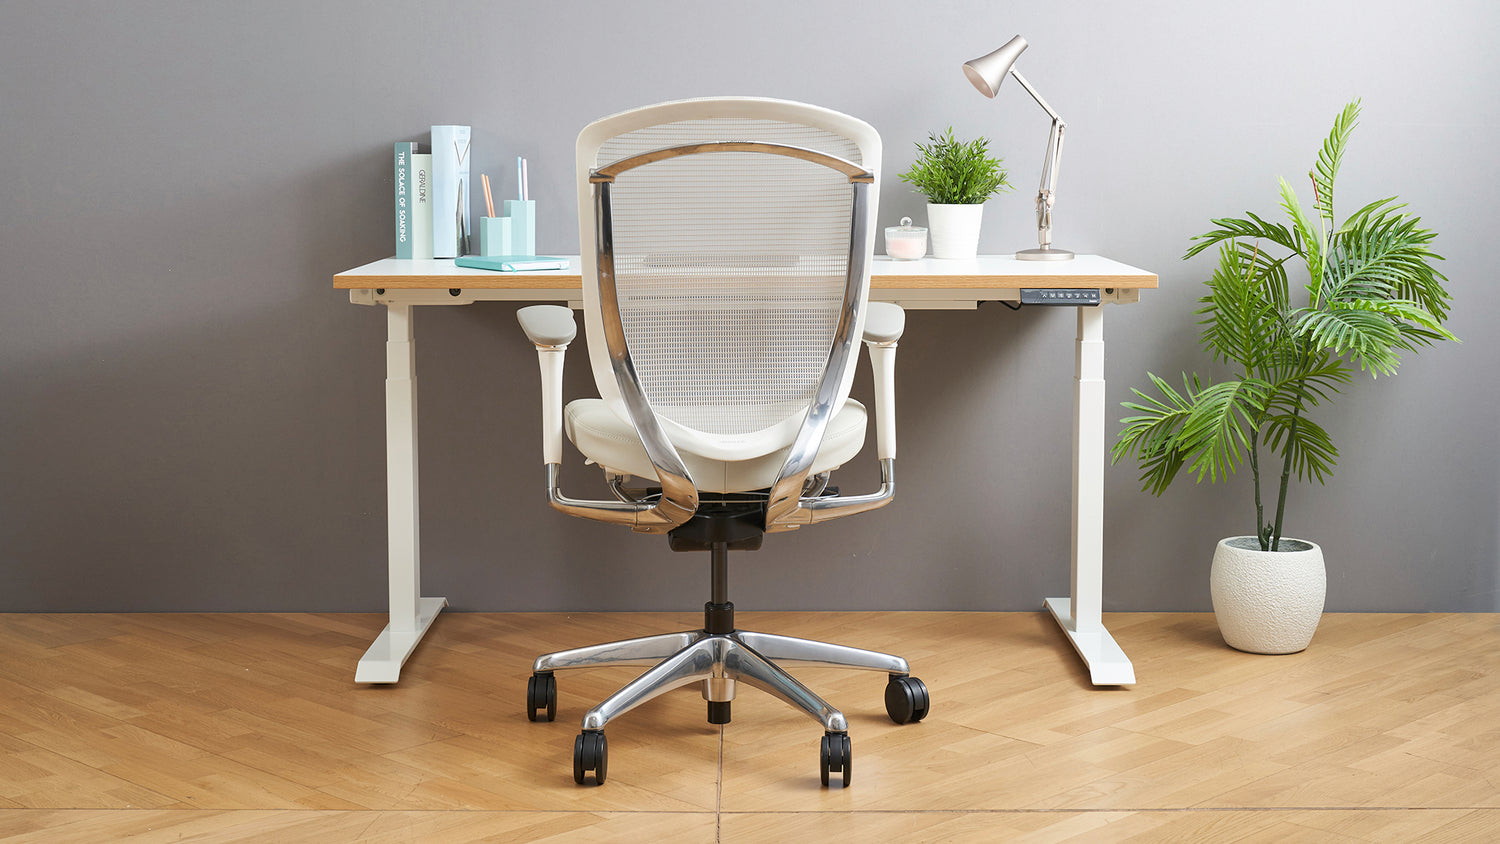 Why do you need a Height Adjustable Desk at home office?